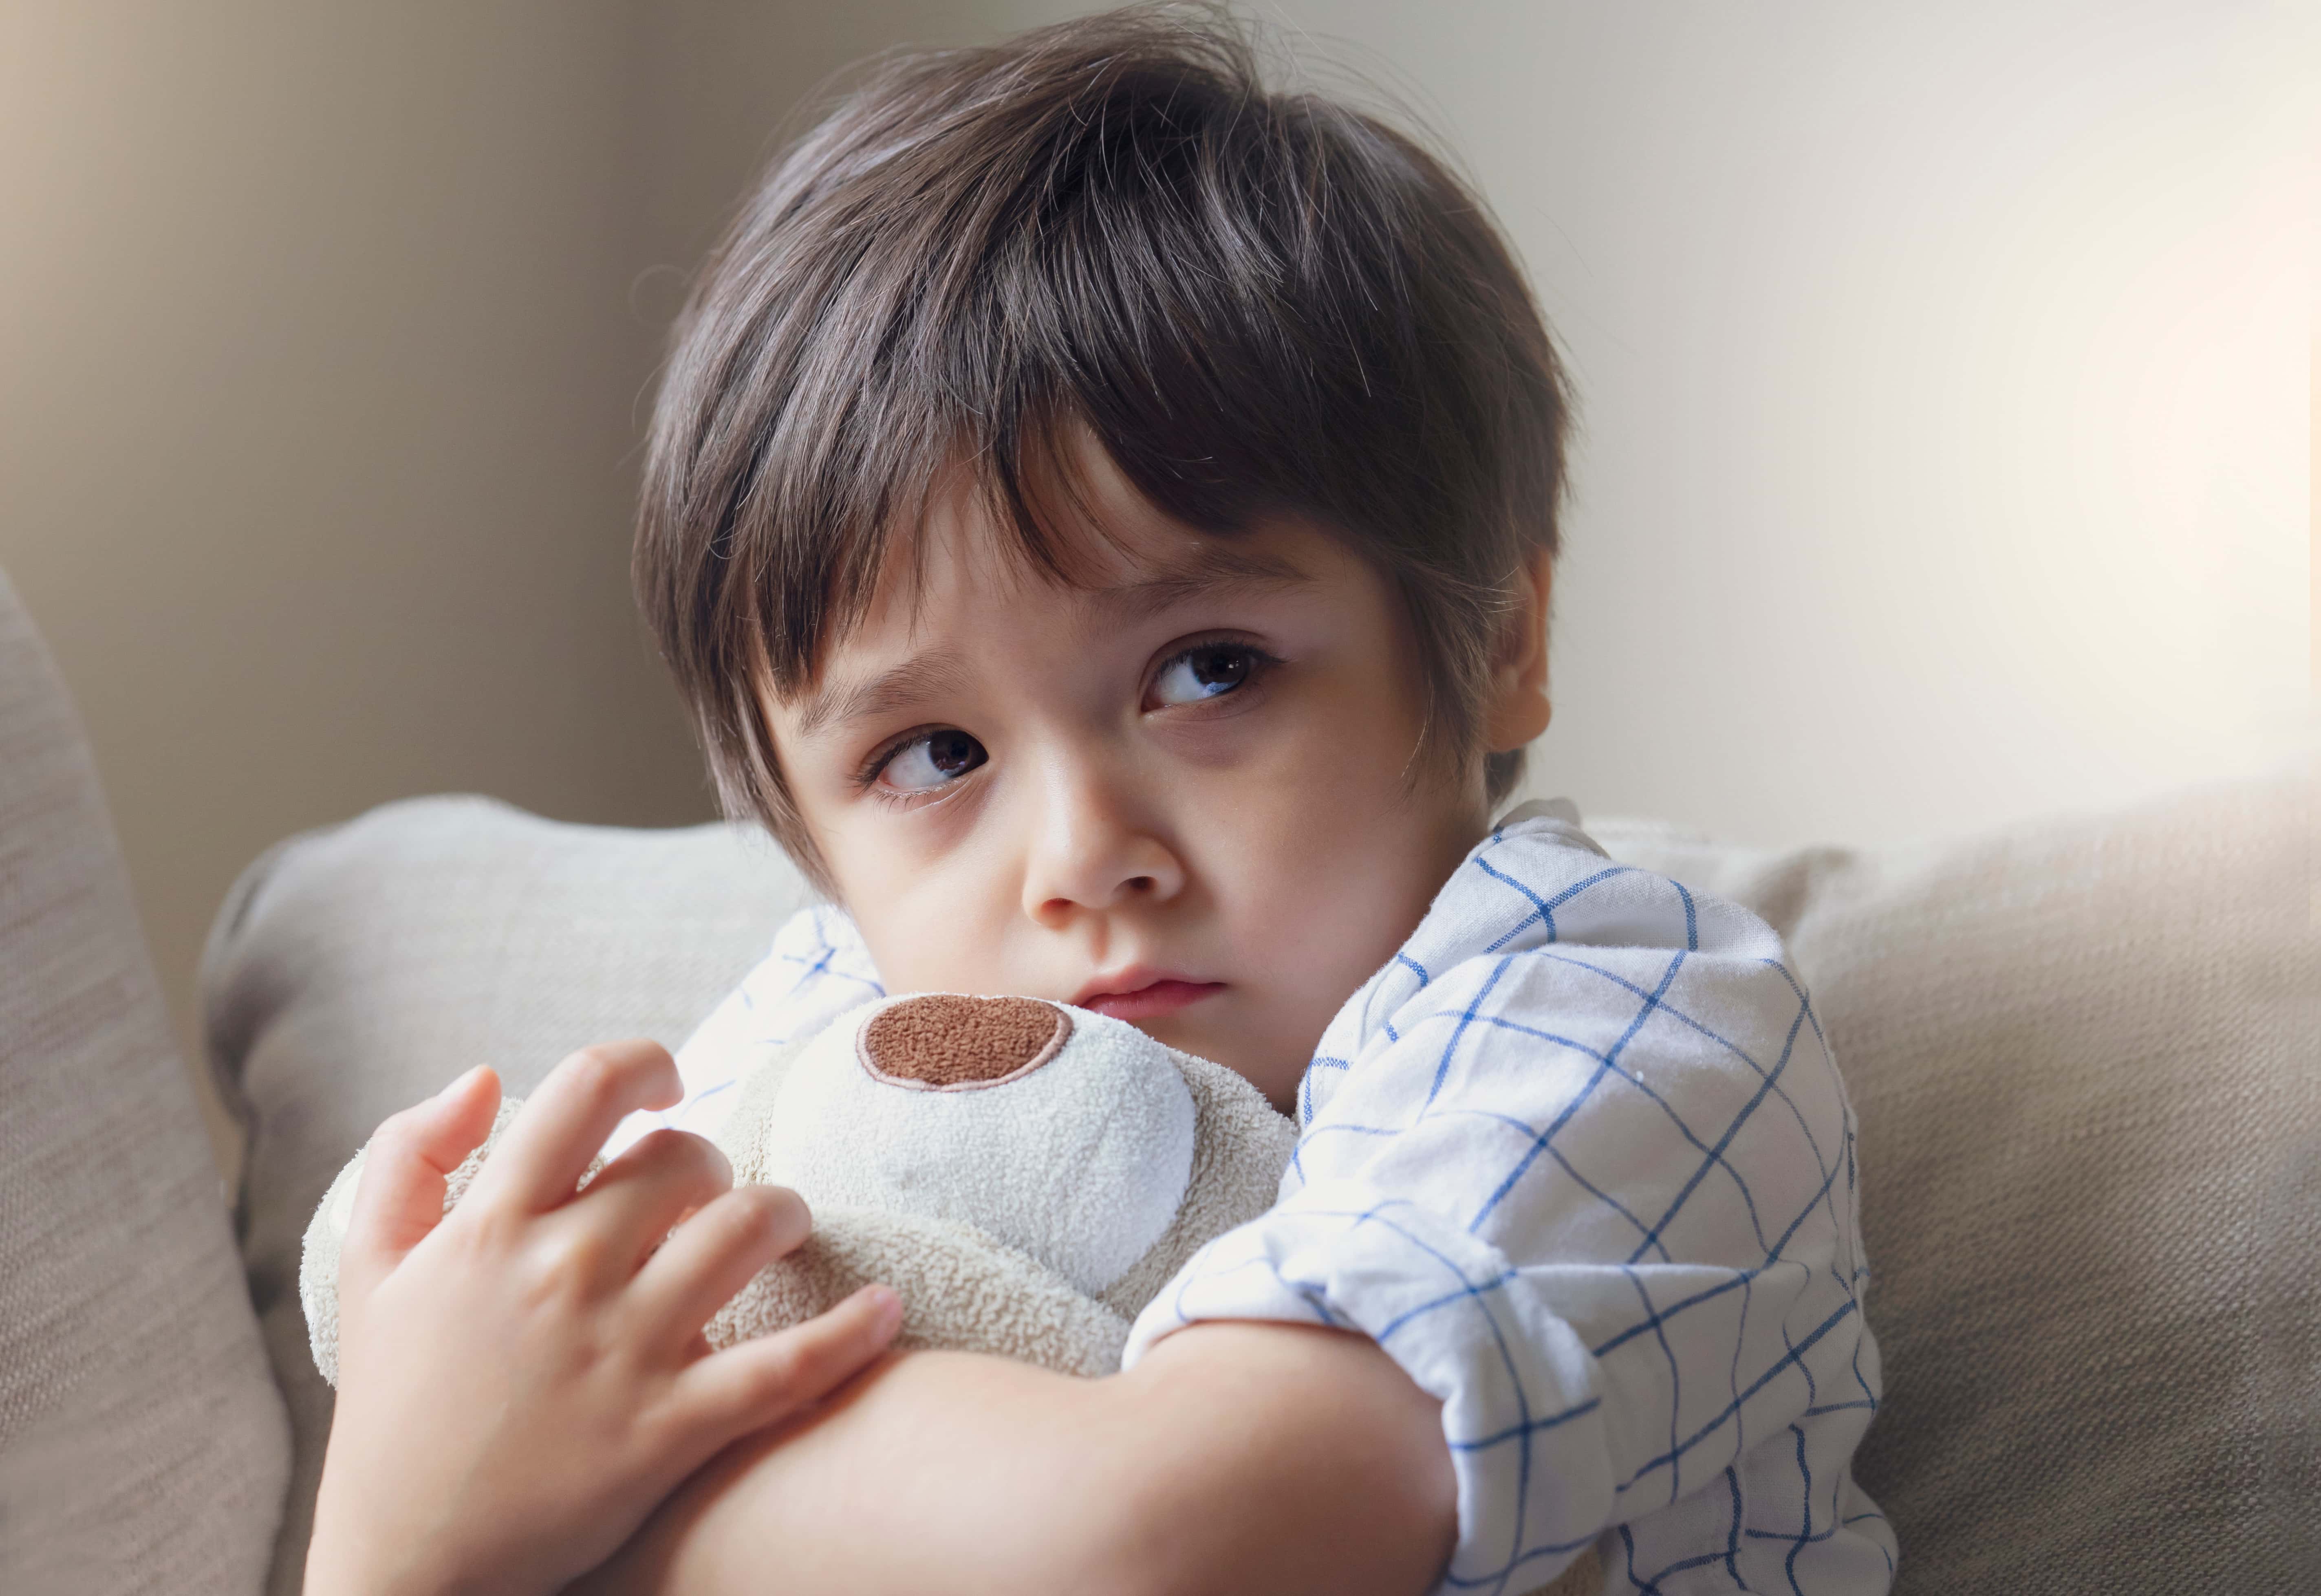 Creepiest Things Kids Have Ever Said or Done Facts